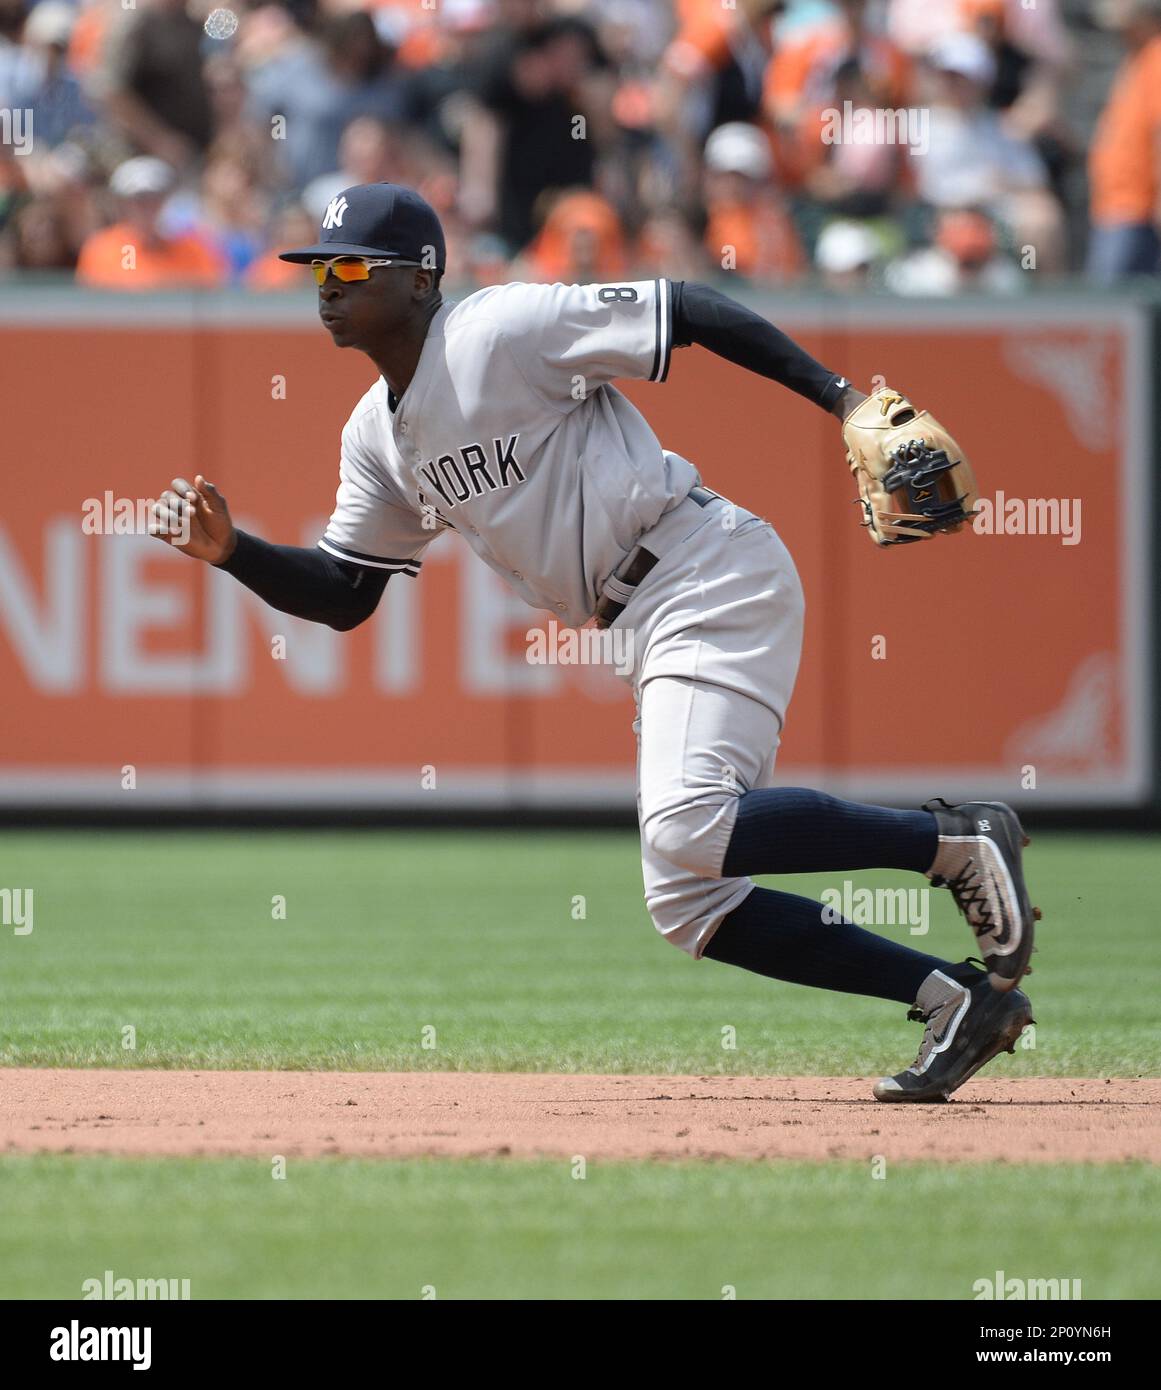 New York Yankees Didi Gregorius (18) during a game against the Baltimore  Orioles on June 5, 2016 at Oriole Park at Camden Yards in Baltimore, MD.  The Yankees beat the Orioles 1-0.(Chris